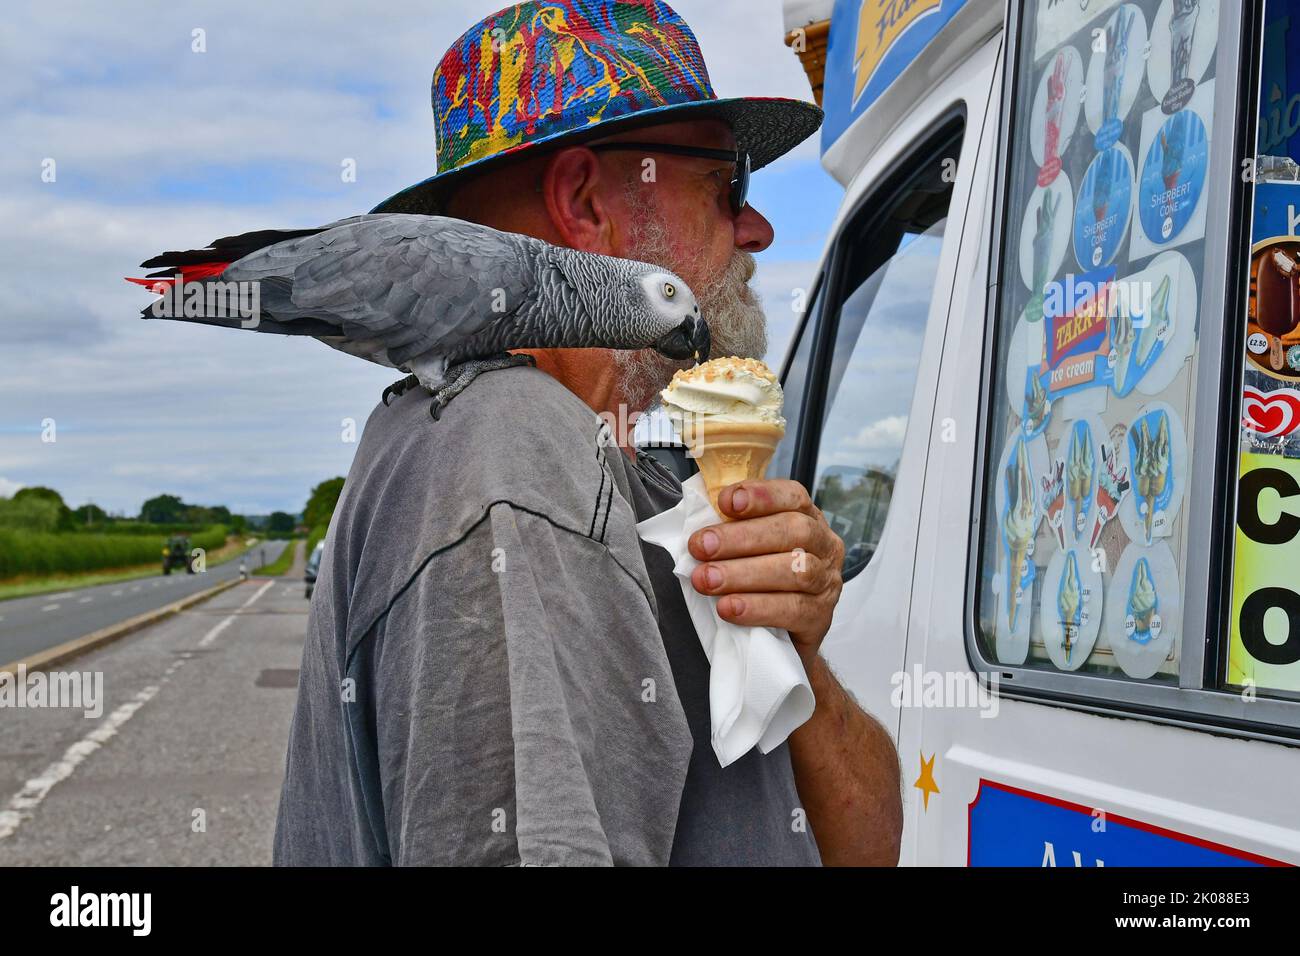 Chew Valley, UK. 10th Sep, 2022. On a hot afternoon in Chew Valley Lakes, Zula the South African gray parrot who is 15 is given an Ice Cream by his owner Shaun as a treat.Picture Credit: Robert Timoney/Alamy Live News Stock Photo